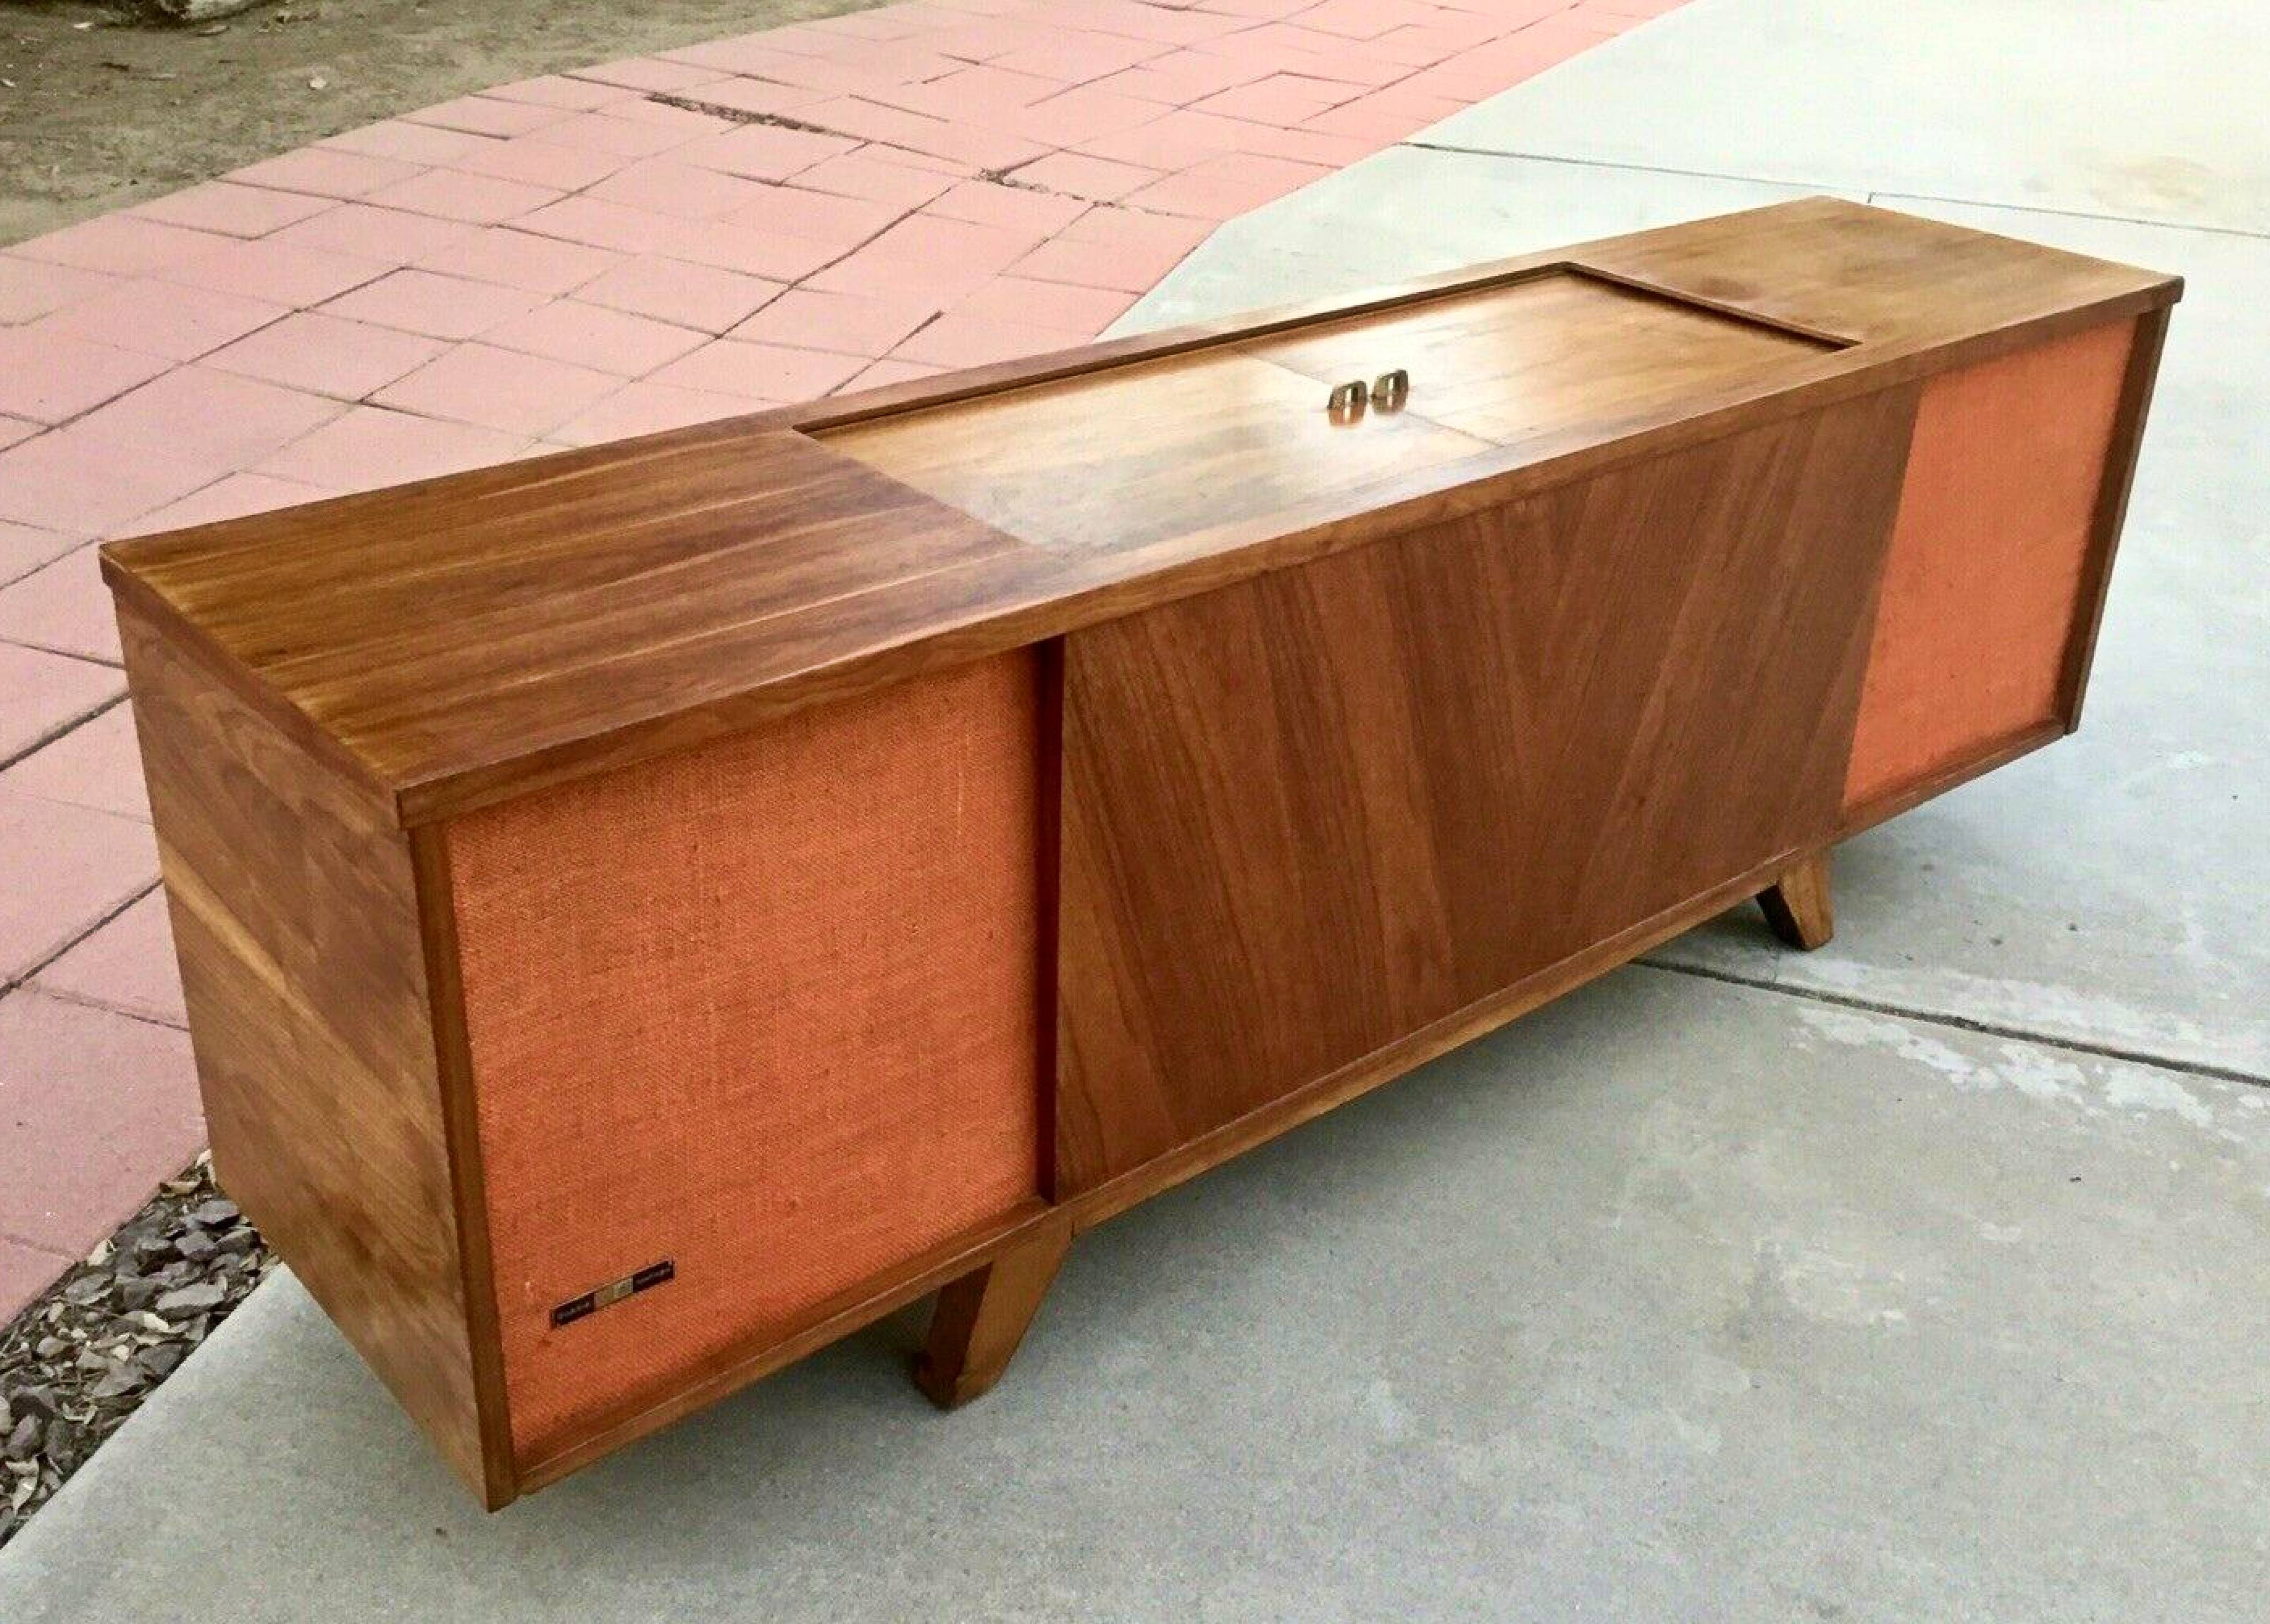 The Curtis Mathes, Super Audio 72, Mid Century Modern Curtis Mathes Stereo Console,